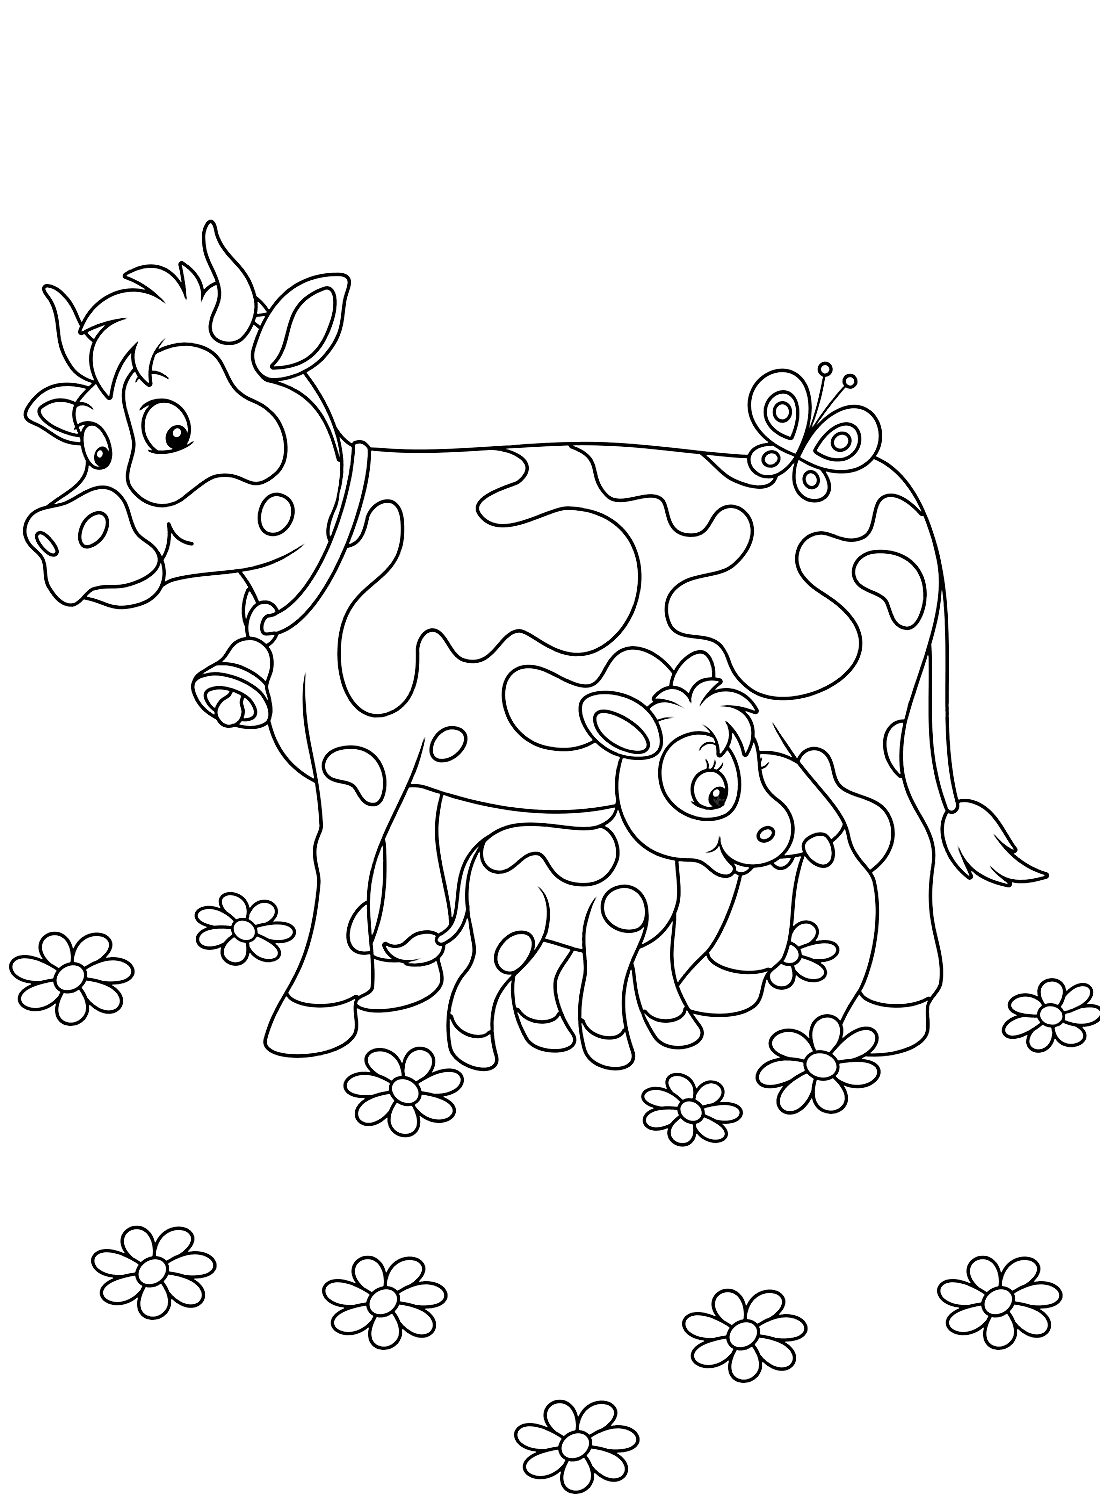 Baby Cow and Cow Coloring Page - Free Printable Coloring Pages